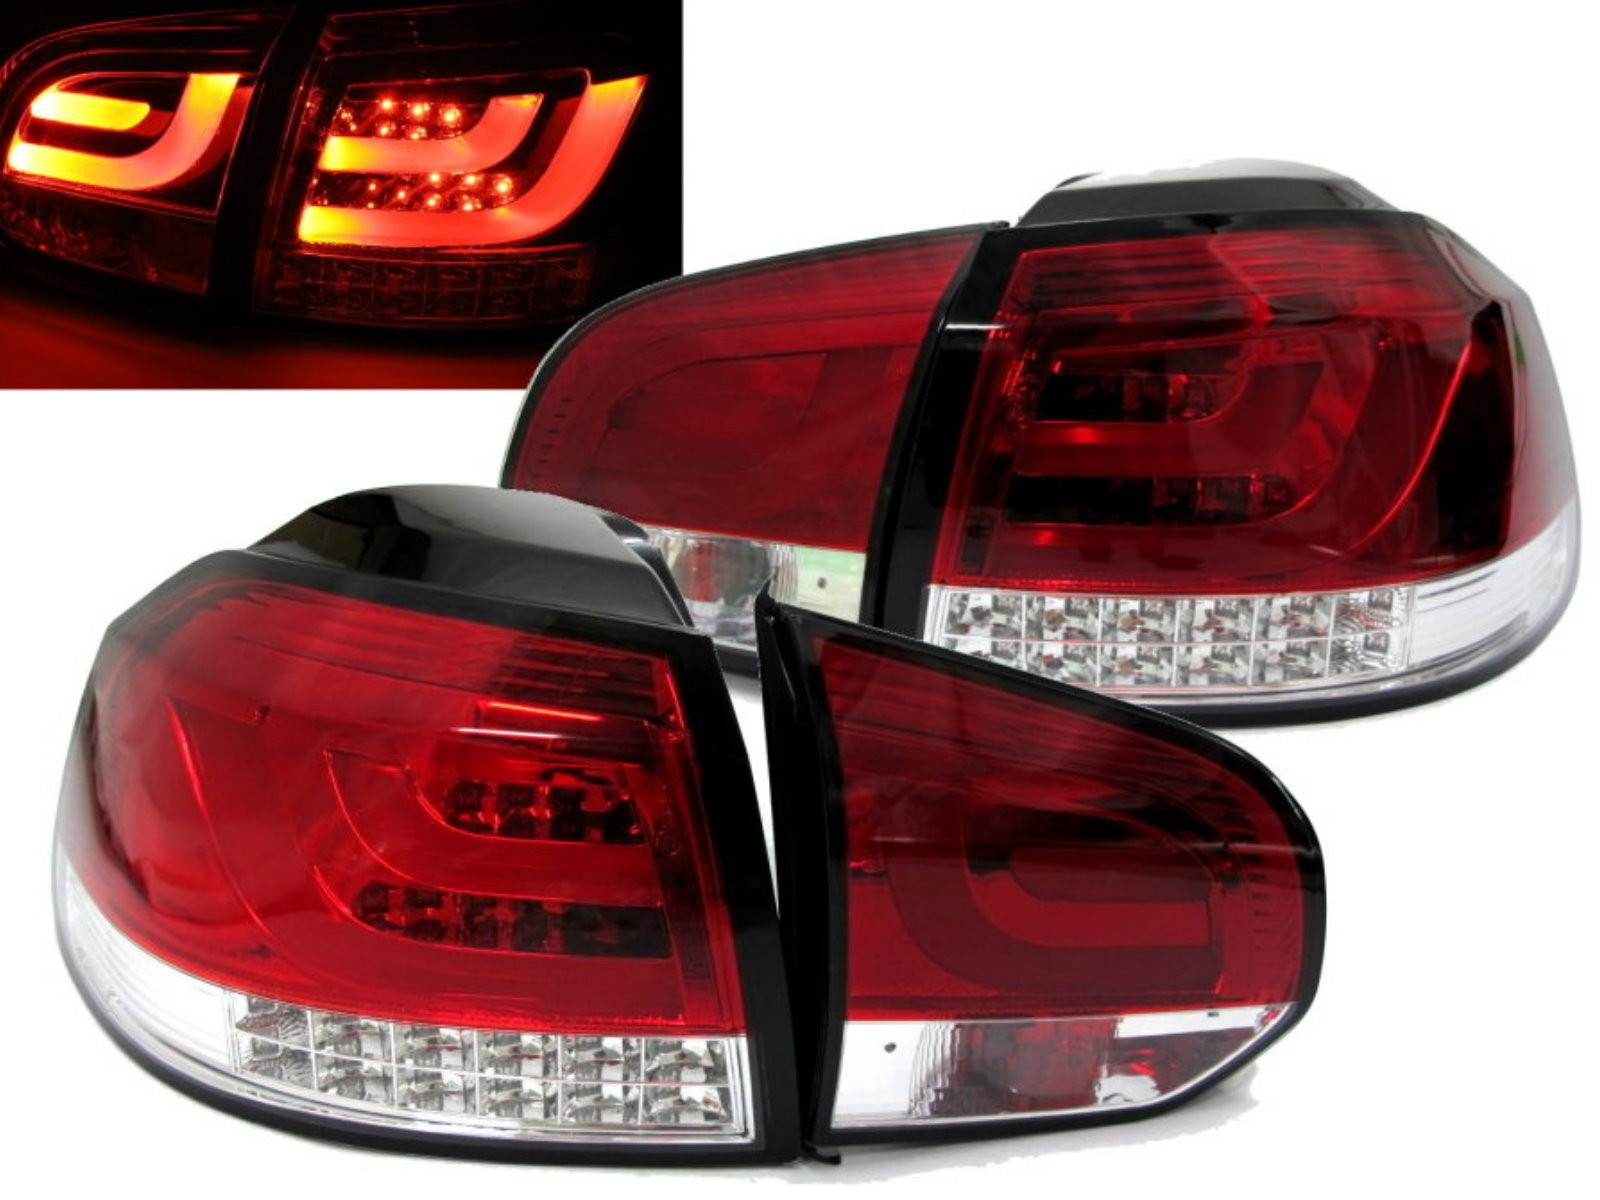 CrazyTheGod Golf 6 Sixth generation 2008-2013 Hatchback/Wagon/Convertible 2D/3D/5D LED Tail Rear Light Red/White for VW Volkswagen